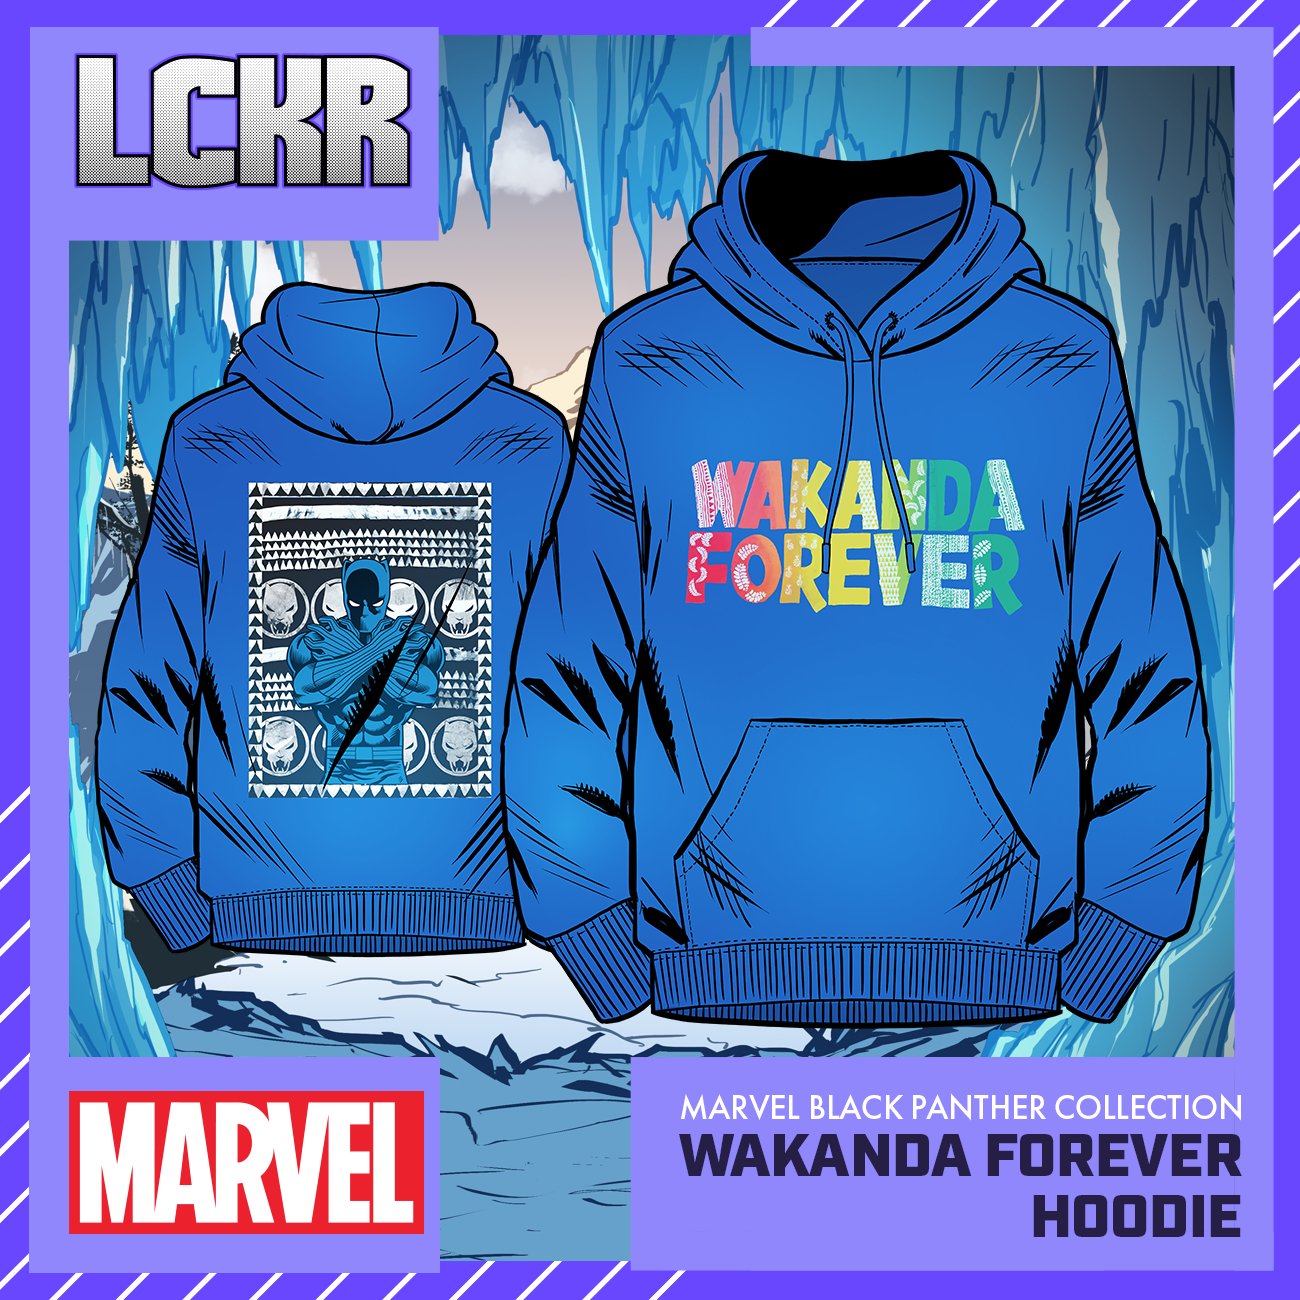 UE_LCKR_STILL_Forever_Hoodie_1x1_211122.png